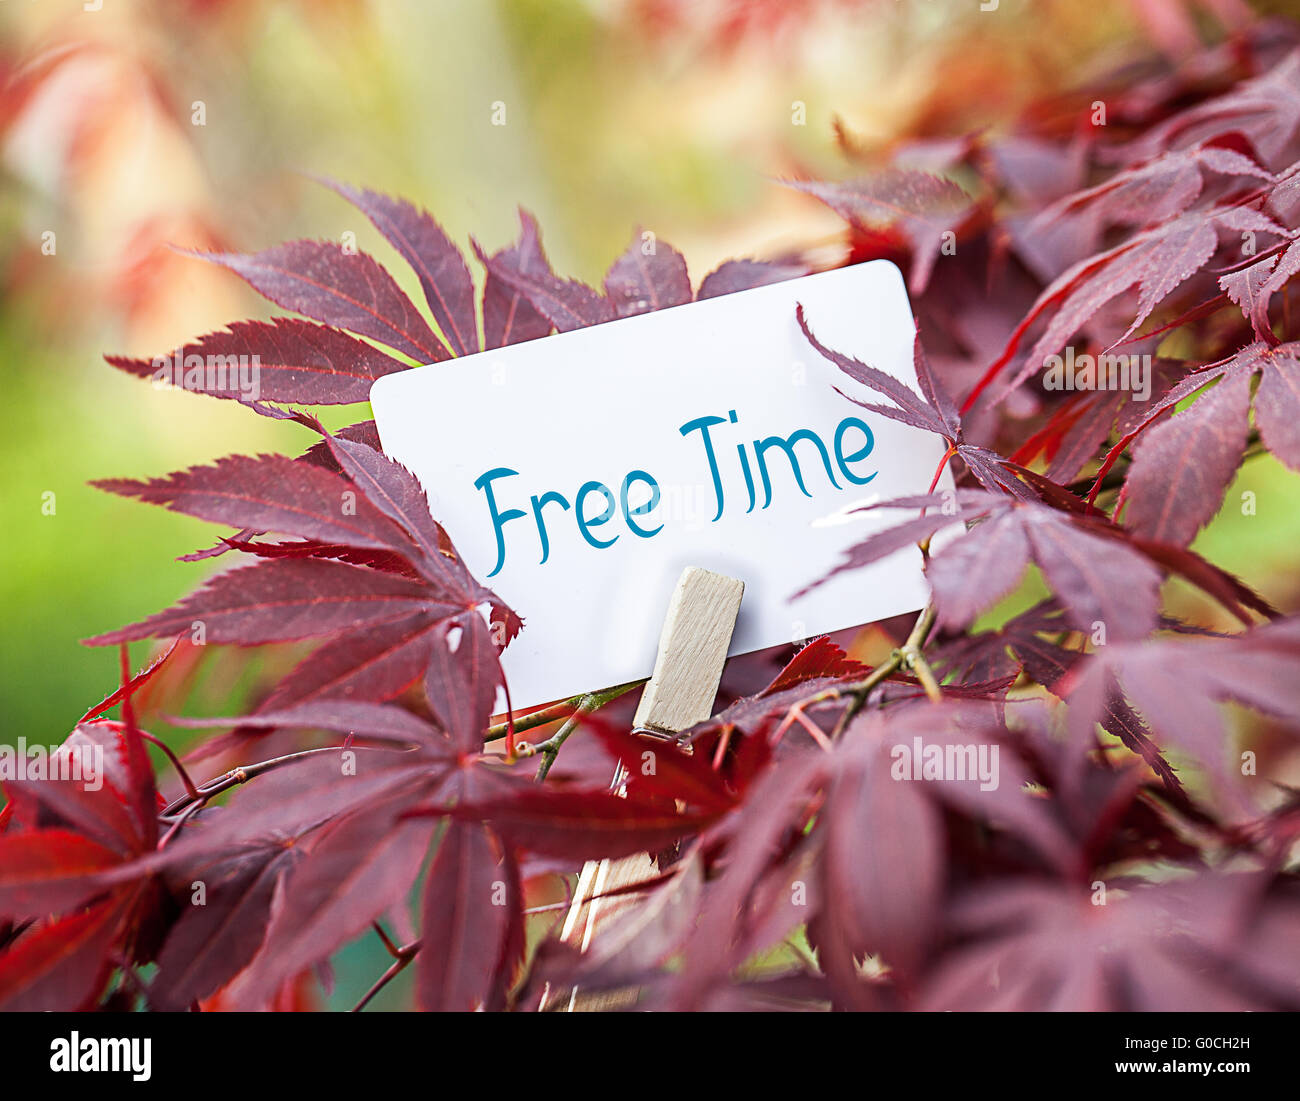 The Word  “Free Time“ in a fan-maple tree Stock Photo